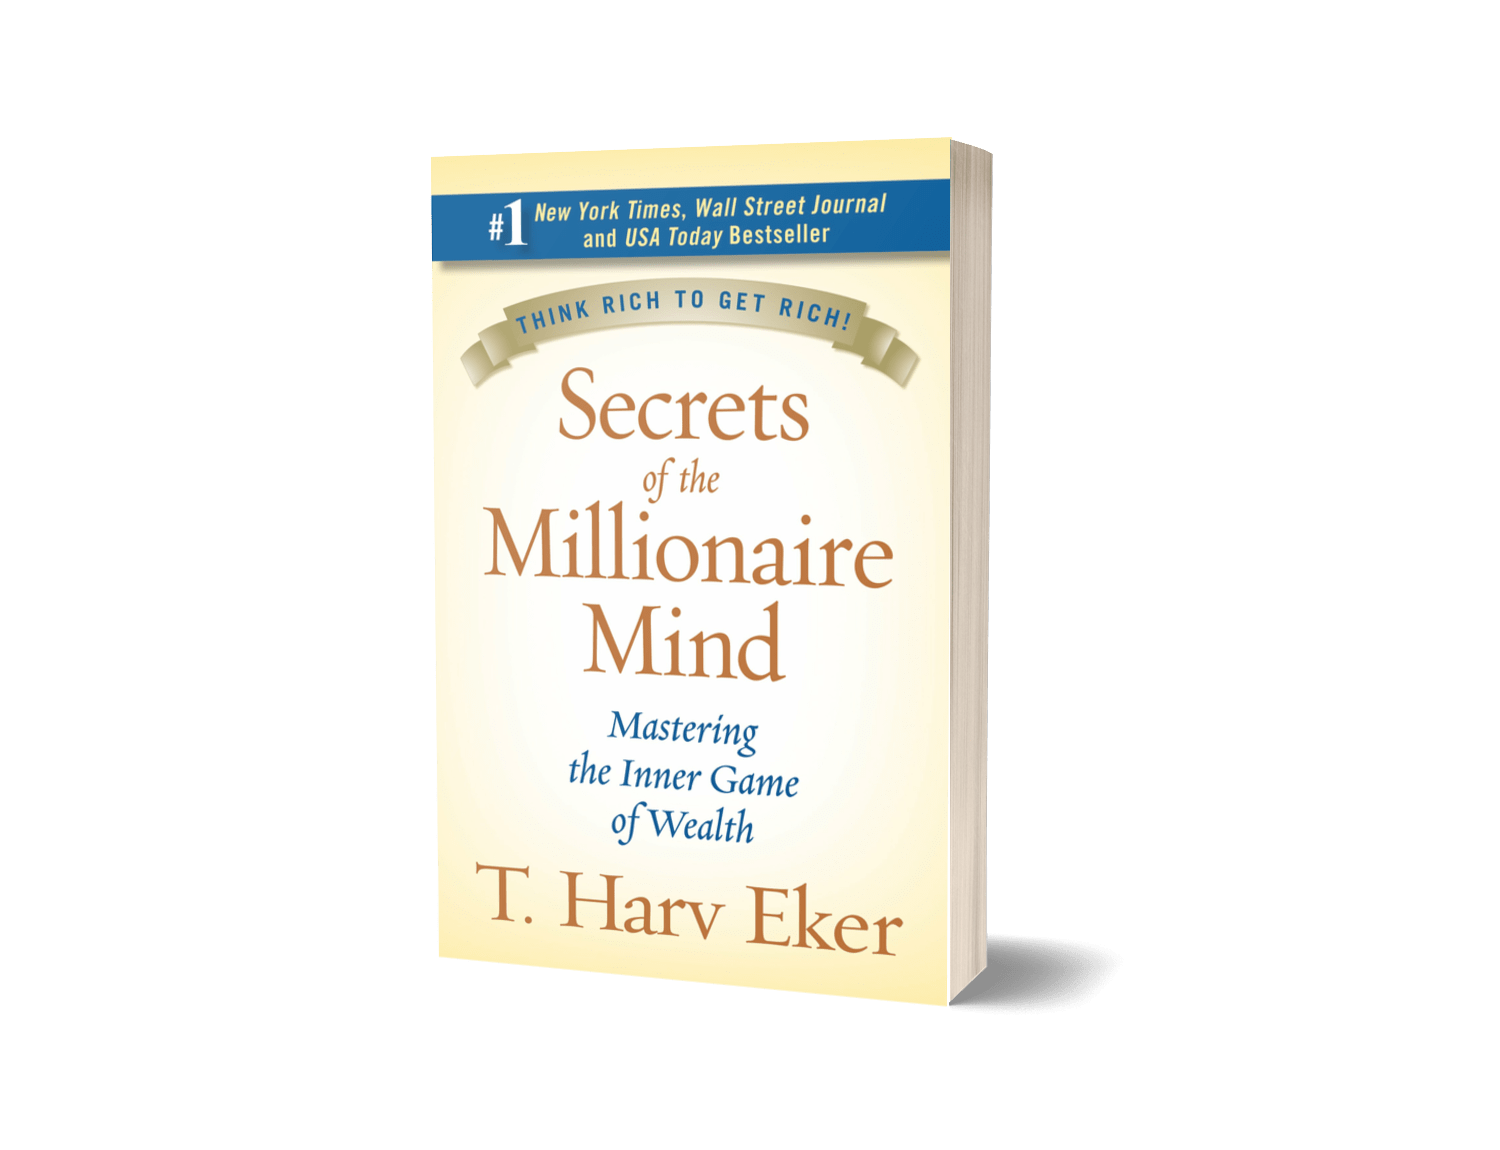 Secrets of the Millionaire Mind: Mastering the Inner Game of Wealth by T. Harv Eker